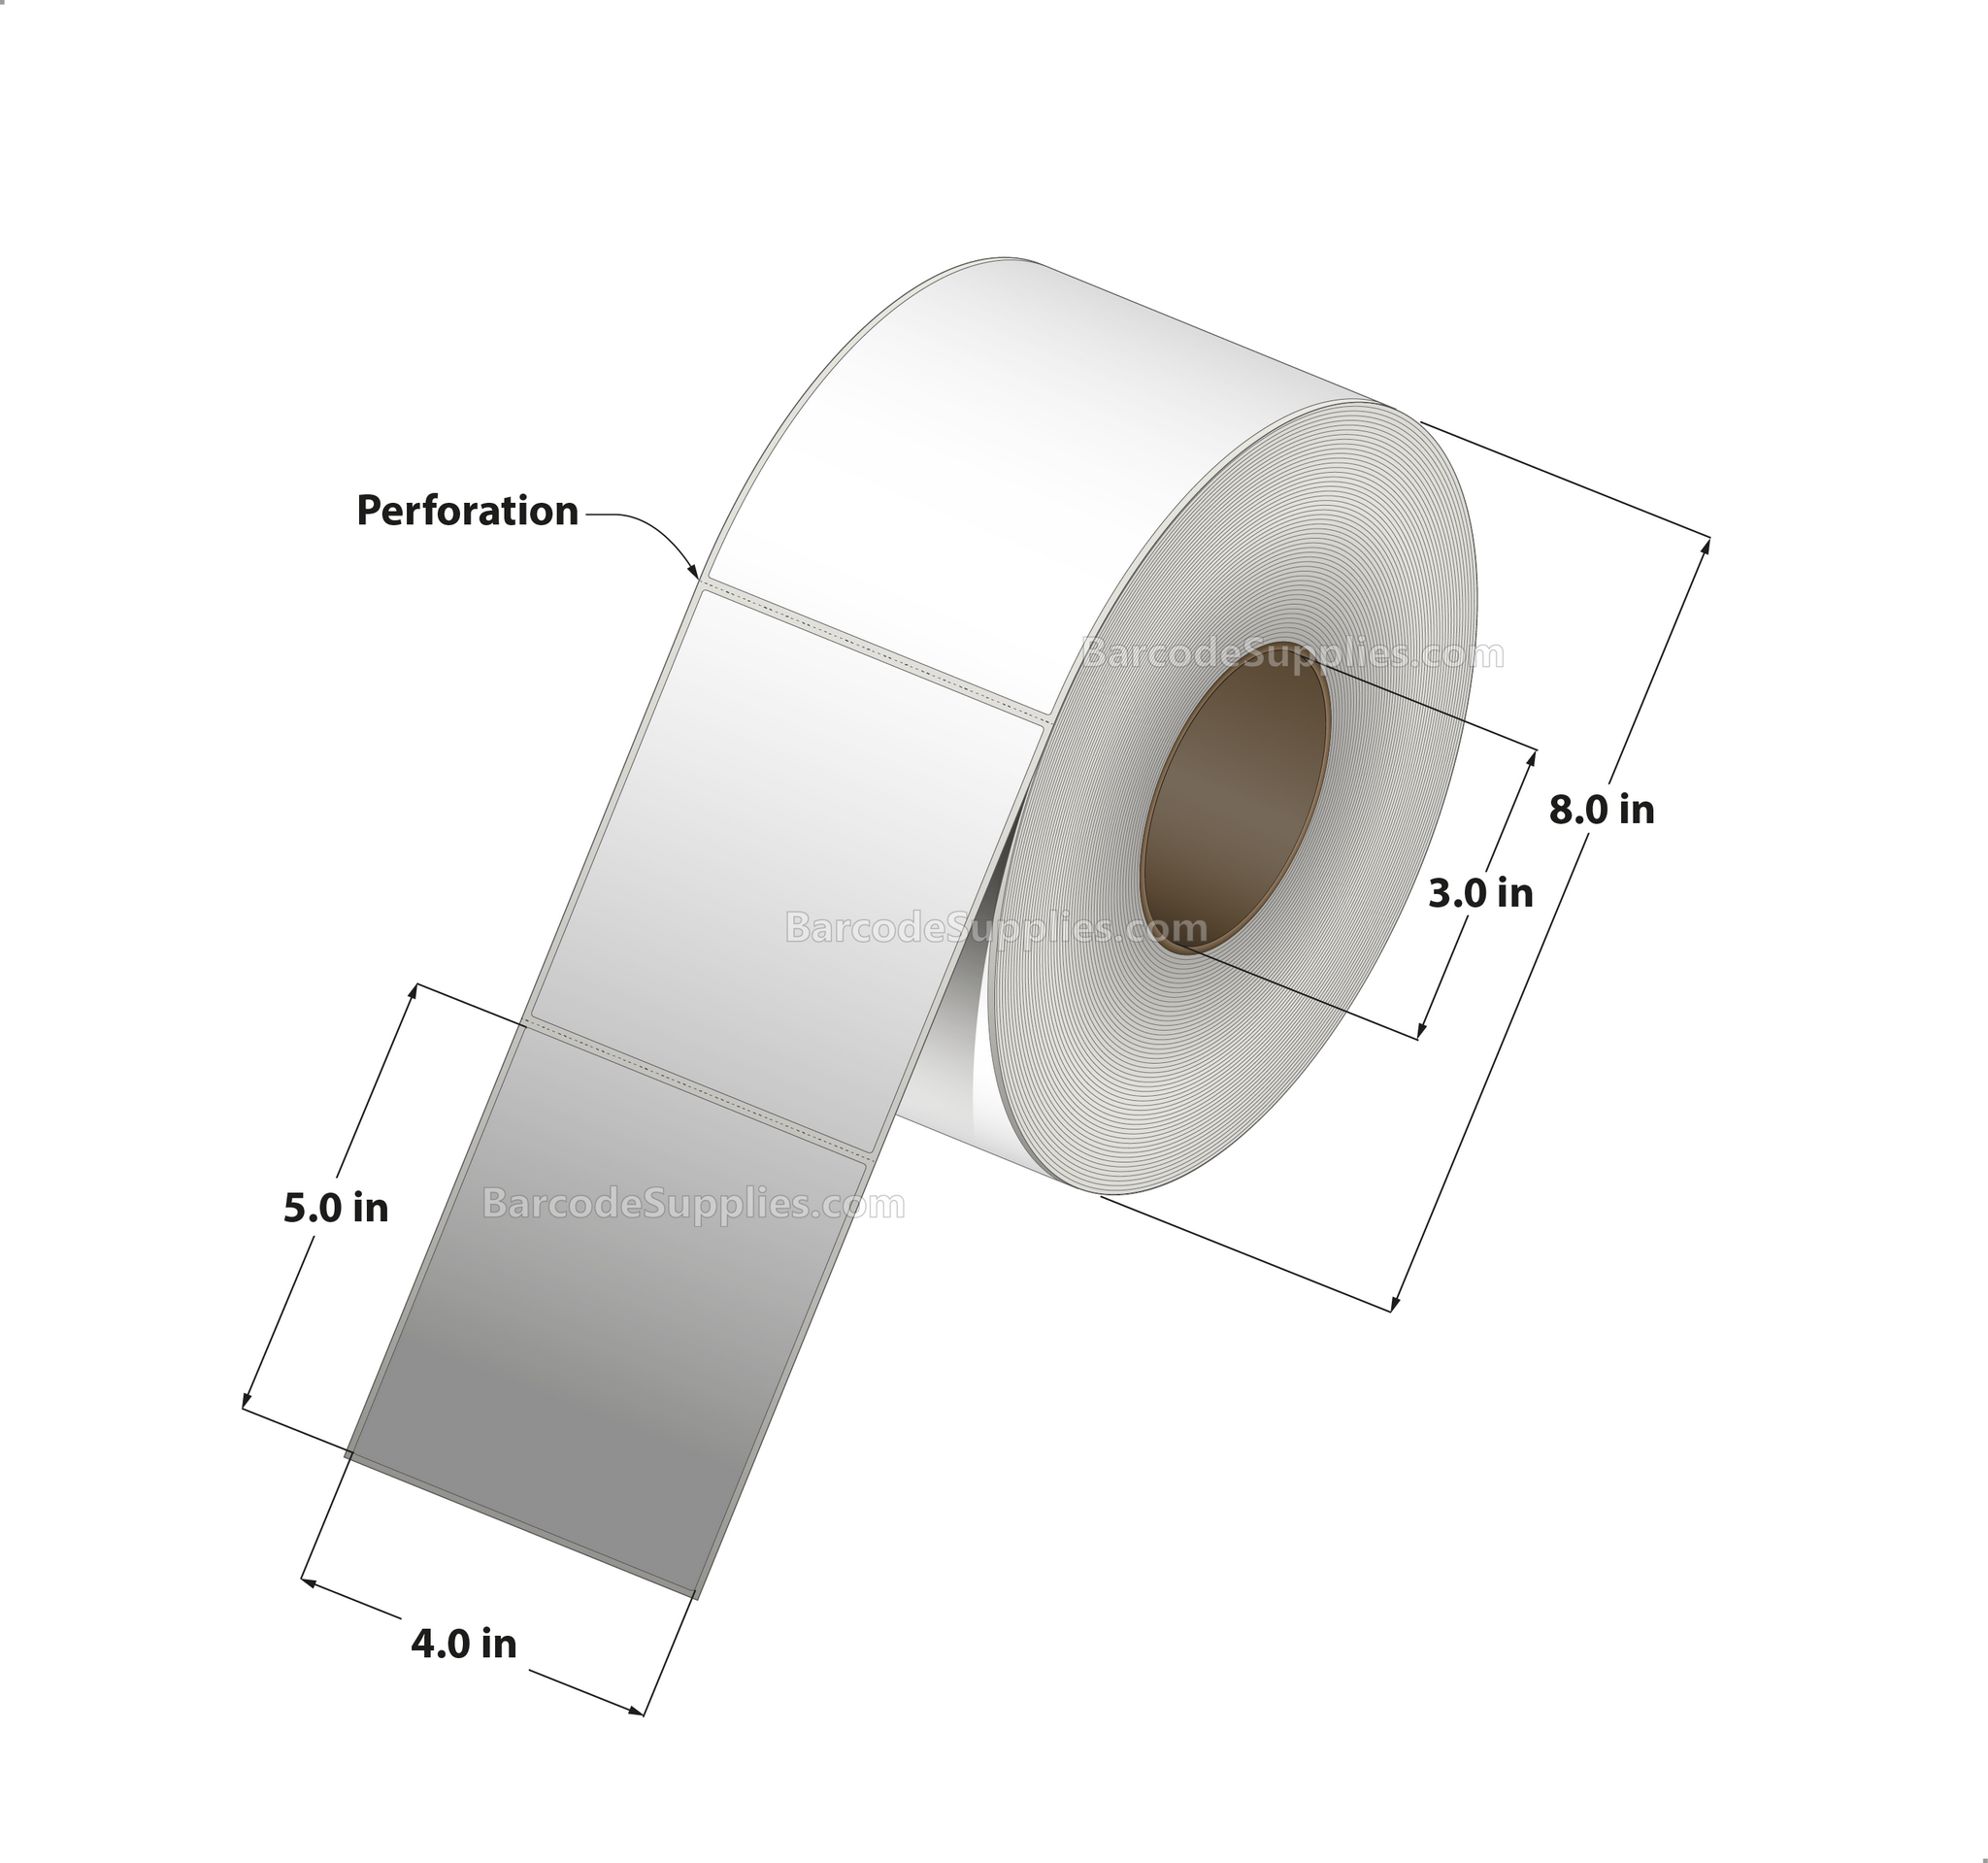 4 x 5 Direct Thermal White Labels With Rubber Adhesive - Perforated - 1220 Labels Per Roll - Carton Of 4 Rolls - 4880 Labels Total - MPN: DT400500-3P